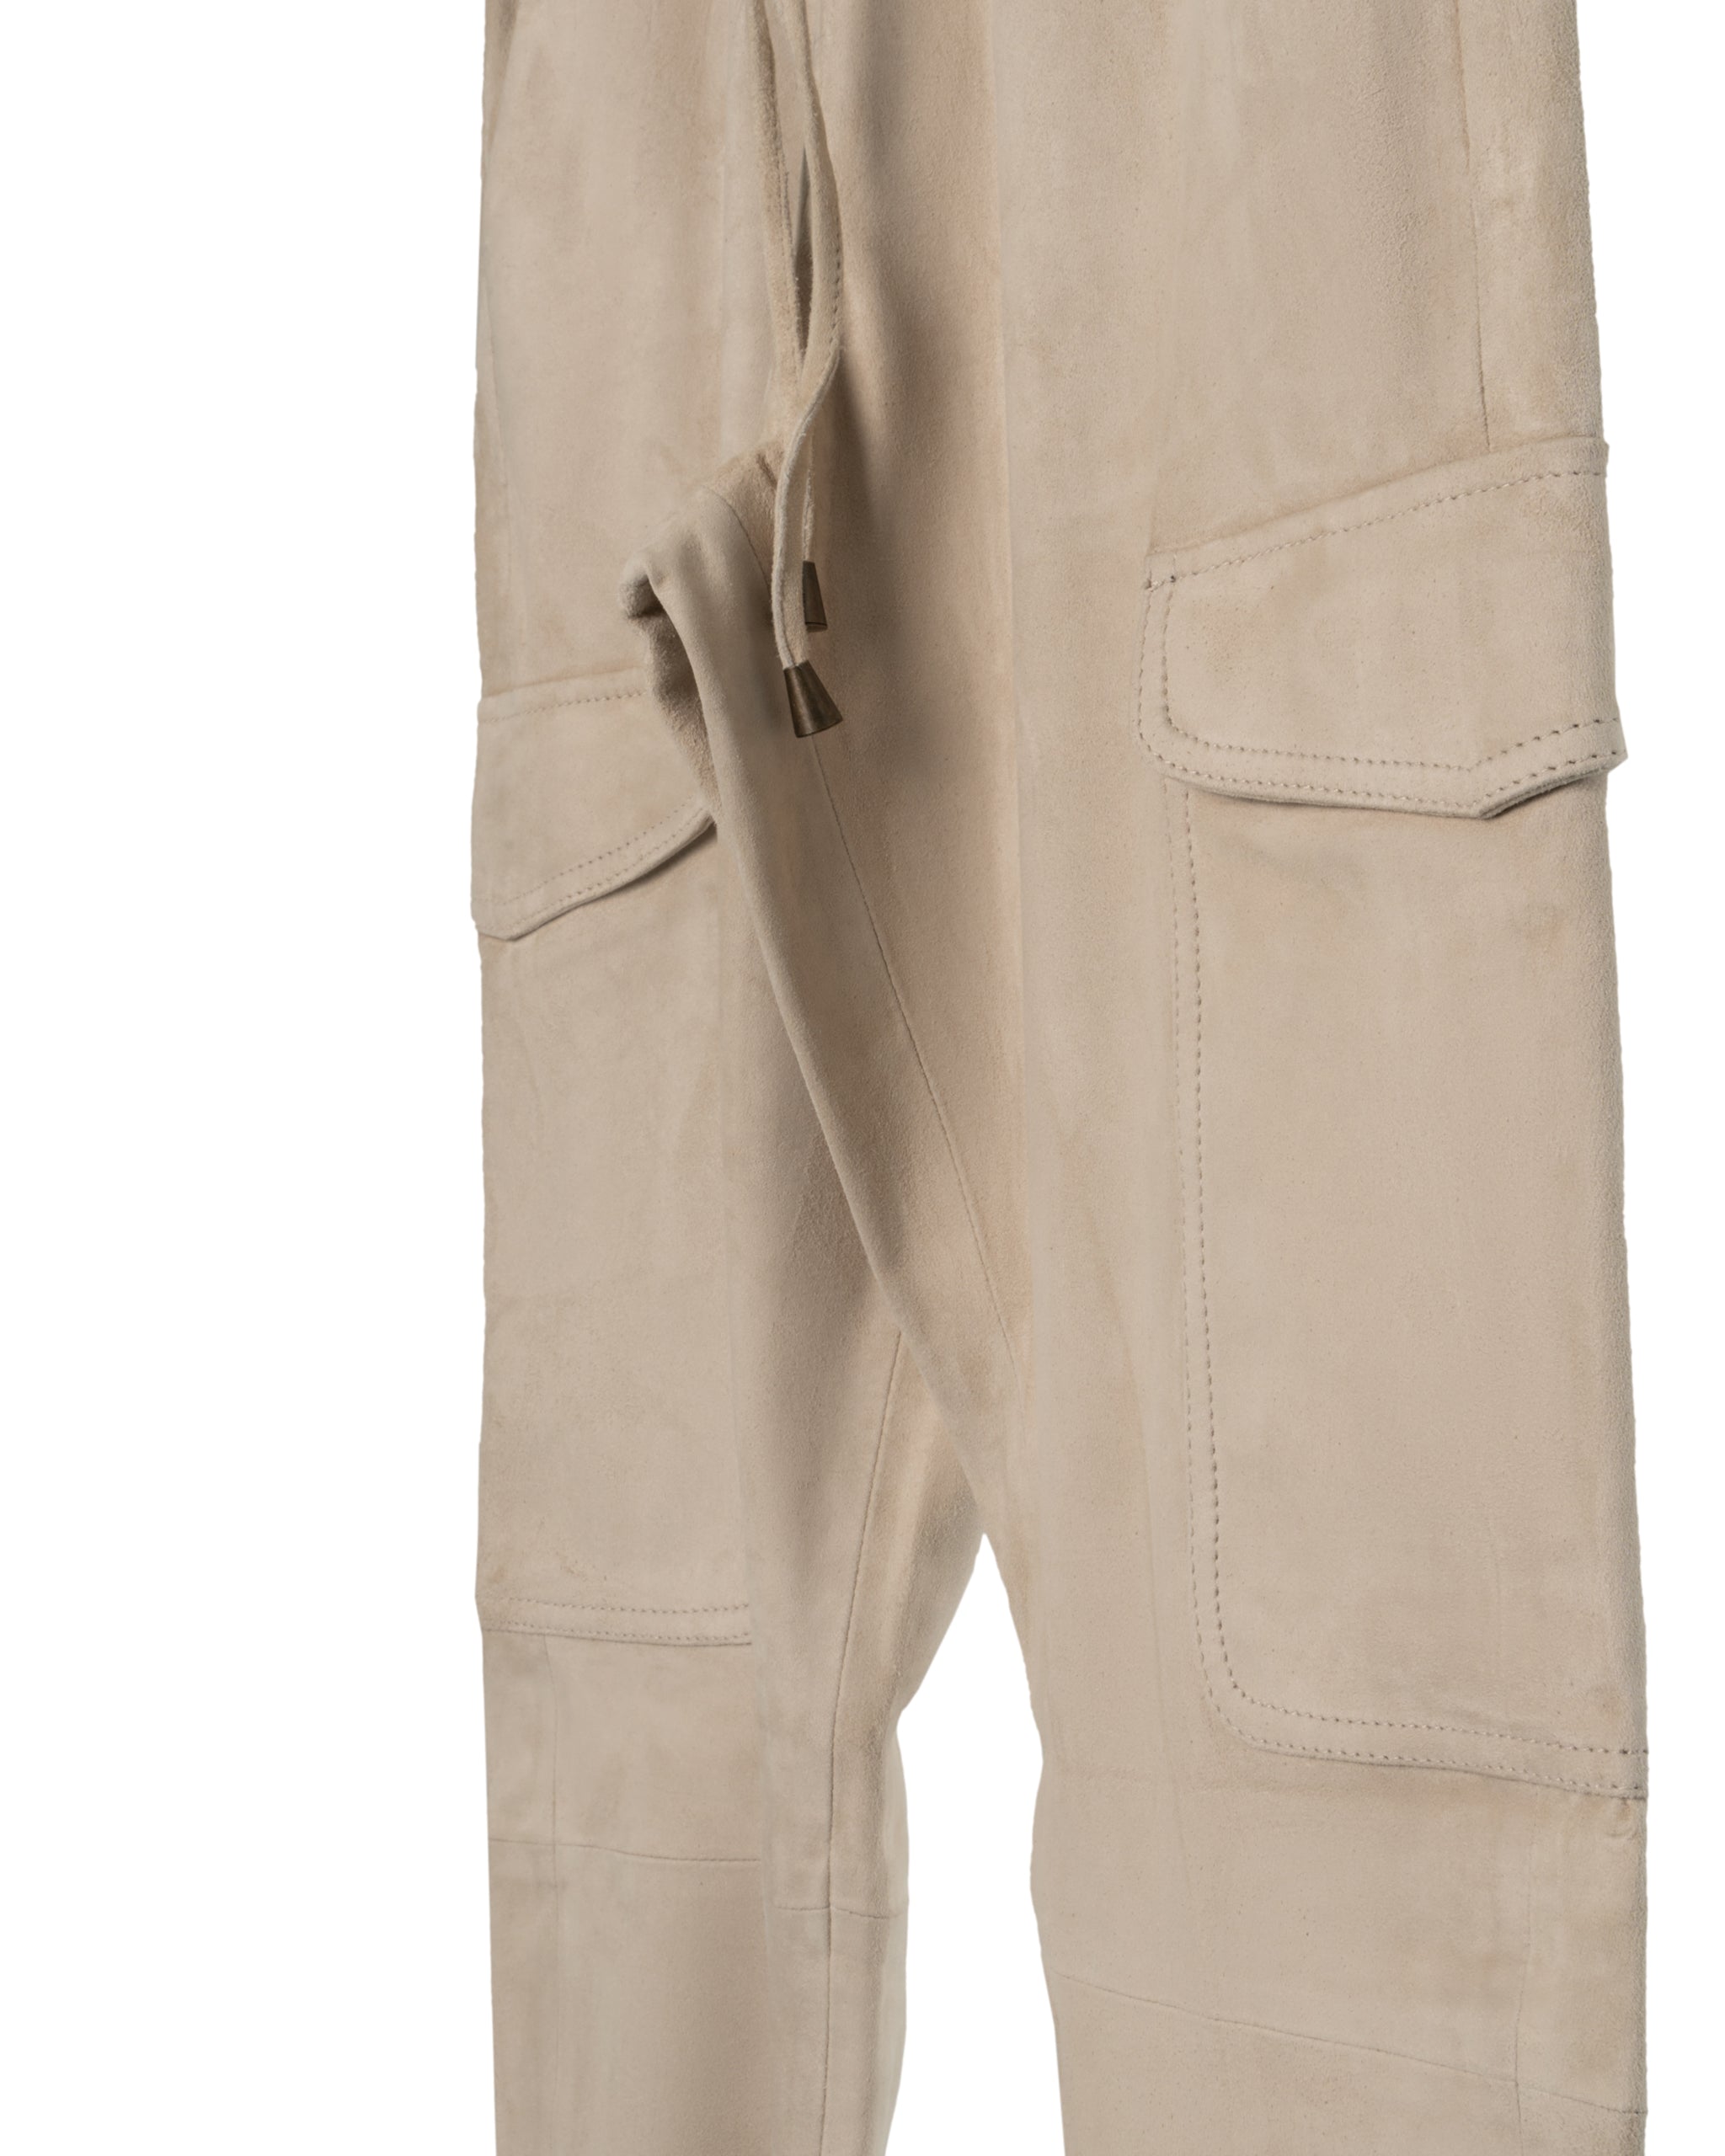 SUEDE STRETCH LEATHER CARGO PANTS